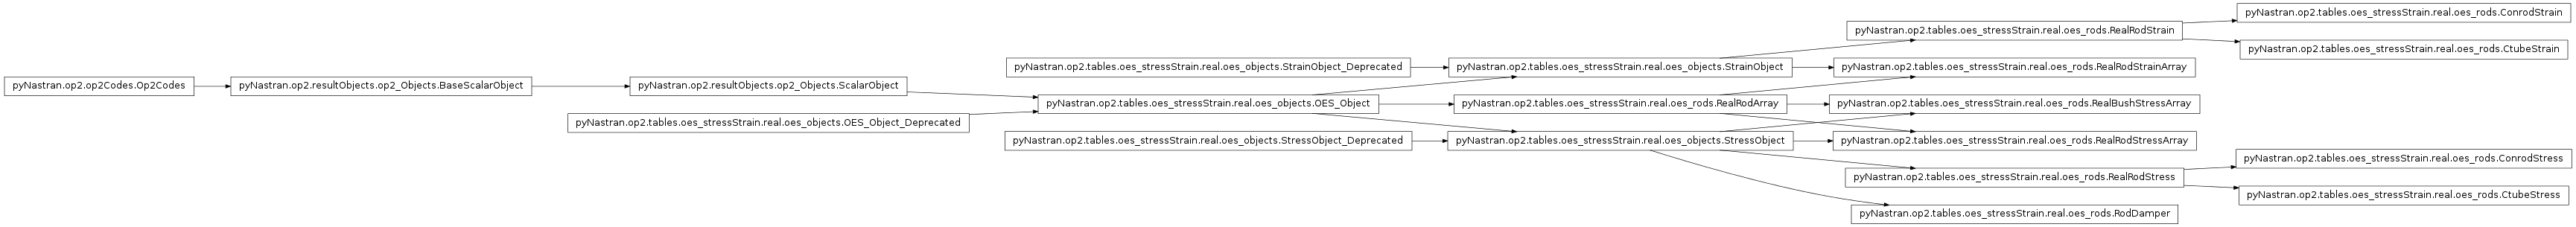 Inheritance diagram of pyNastran.op2.tables.oes_stressStrain.real.oes_rods